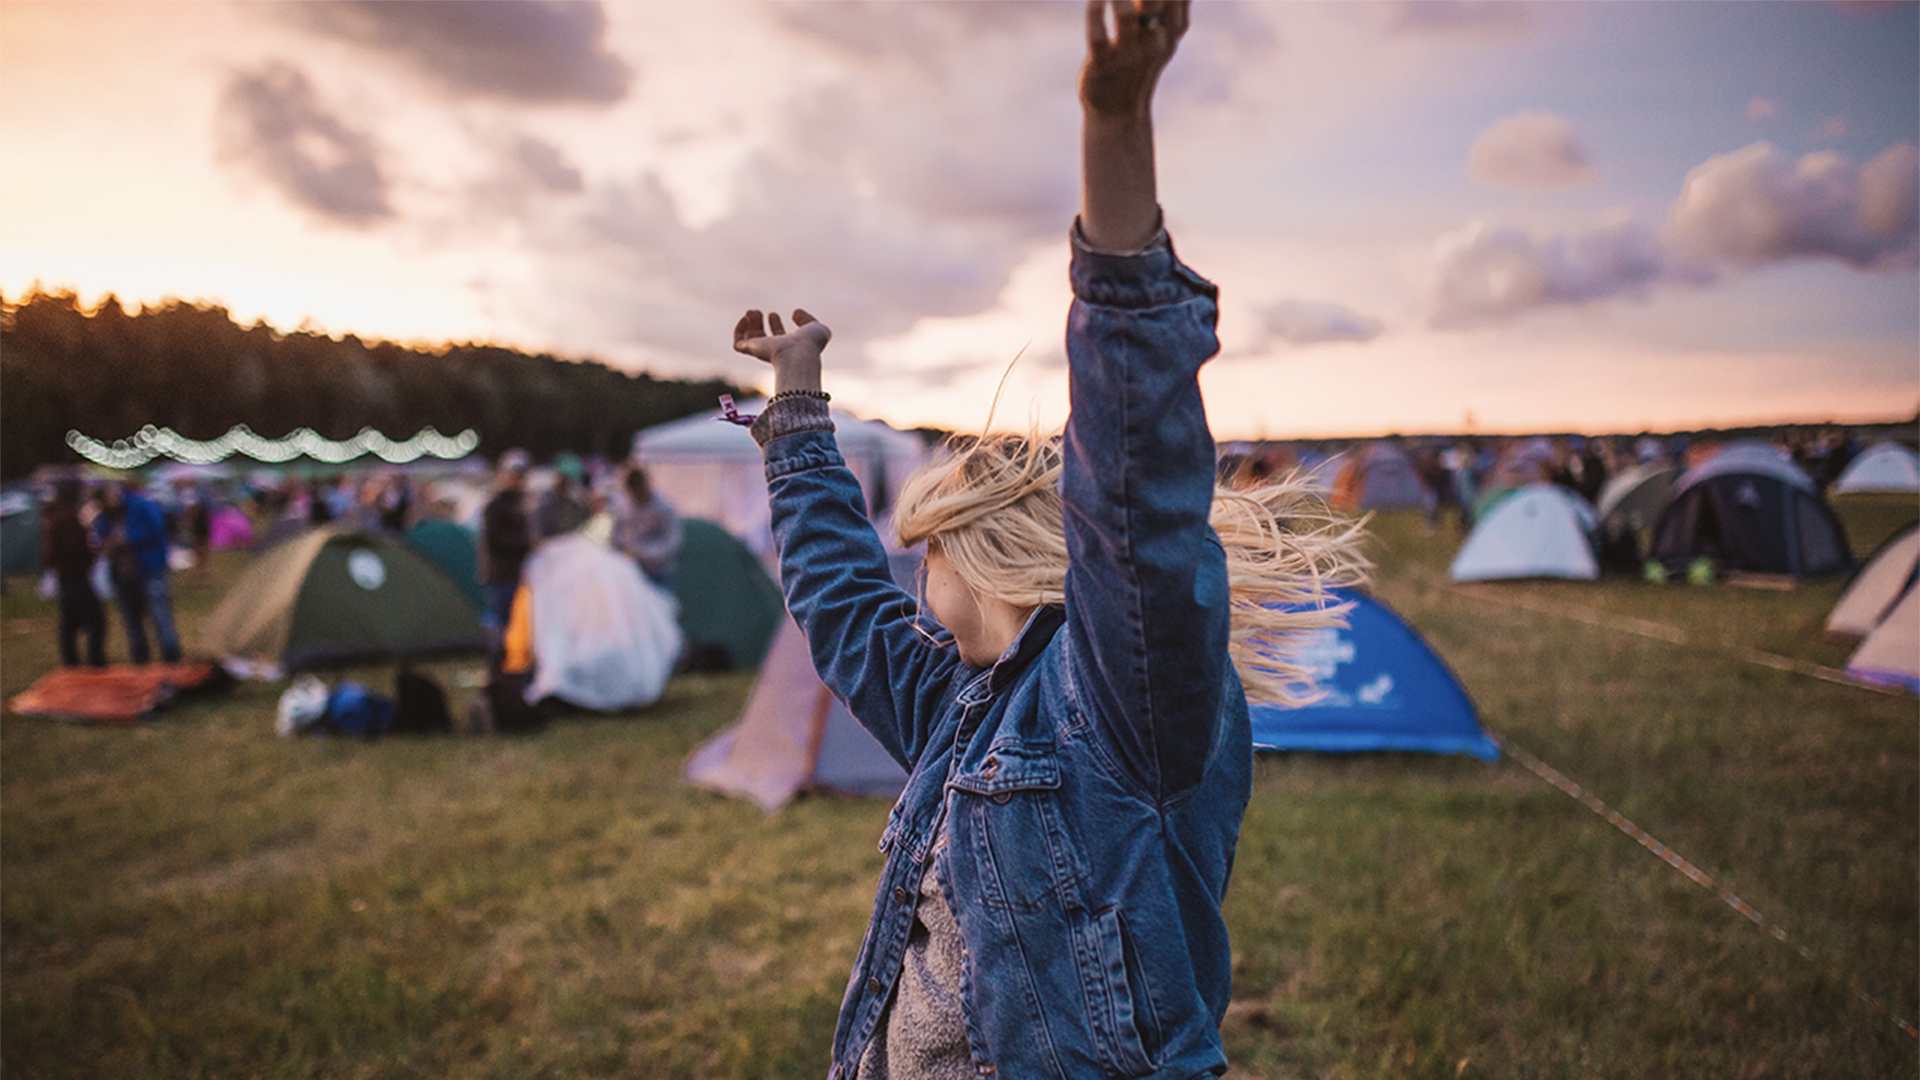 A person dancing on a campsite